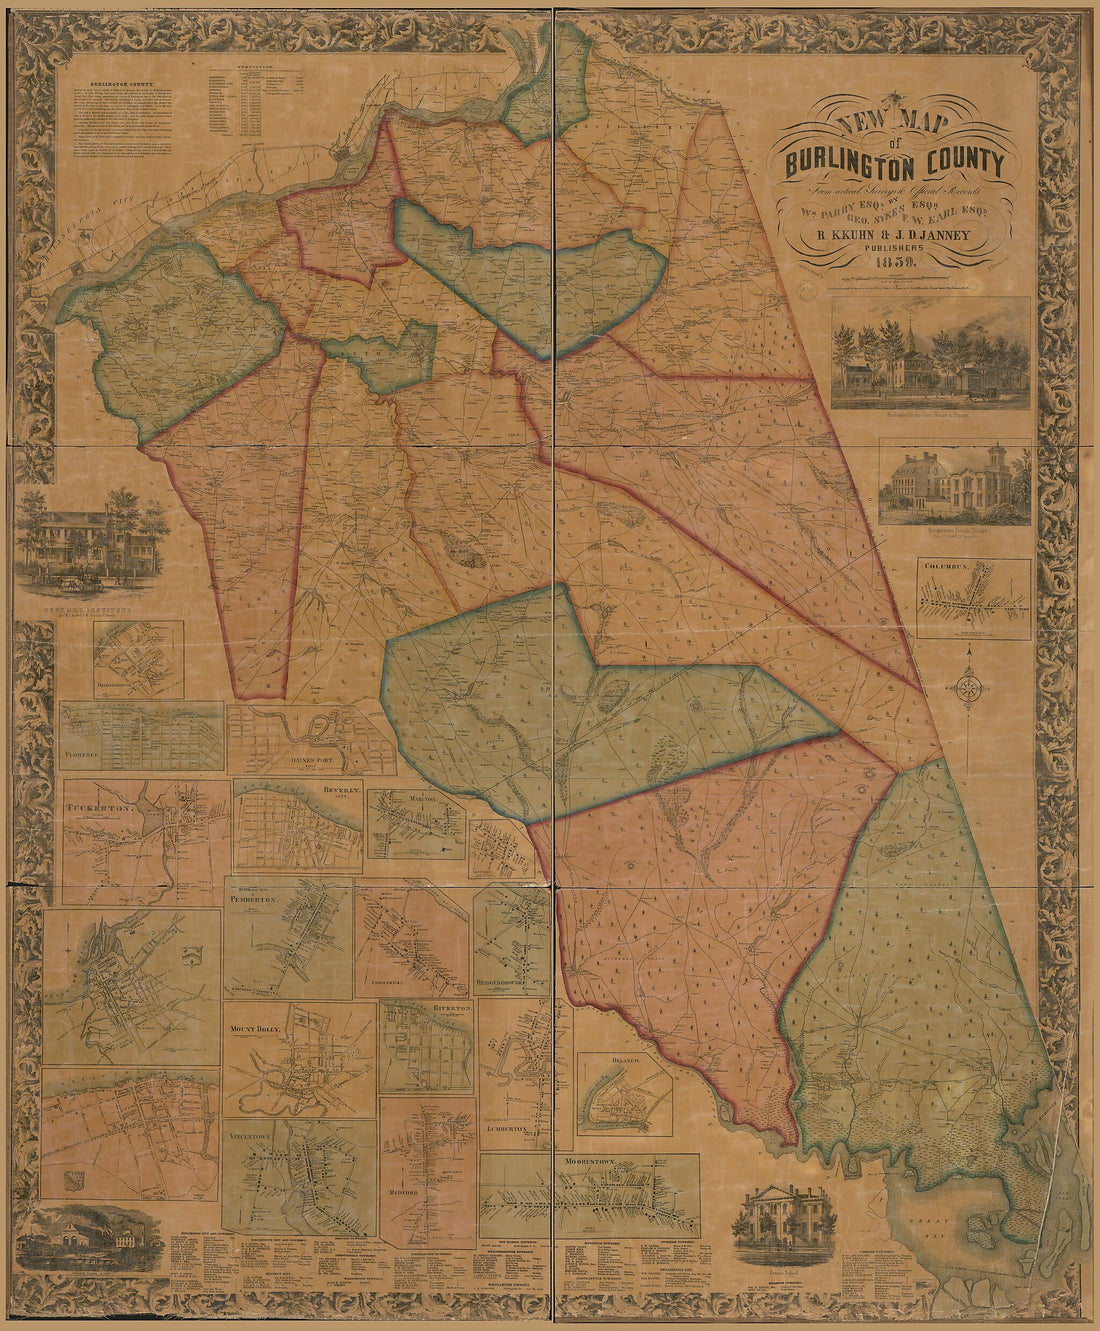 This old map of New Map of Burlington County : from Actual Surveys &amp; Official Records from 1859 was created by F. W. Earl,  P.S. Duval &amp; Co, William Parry,  R.K. Kuhn &amp; J.D. Janney (Firm), George Sykes in 1859